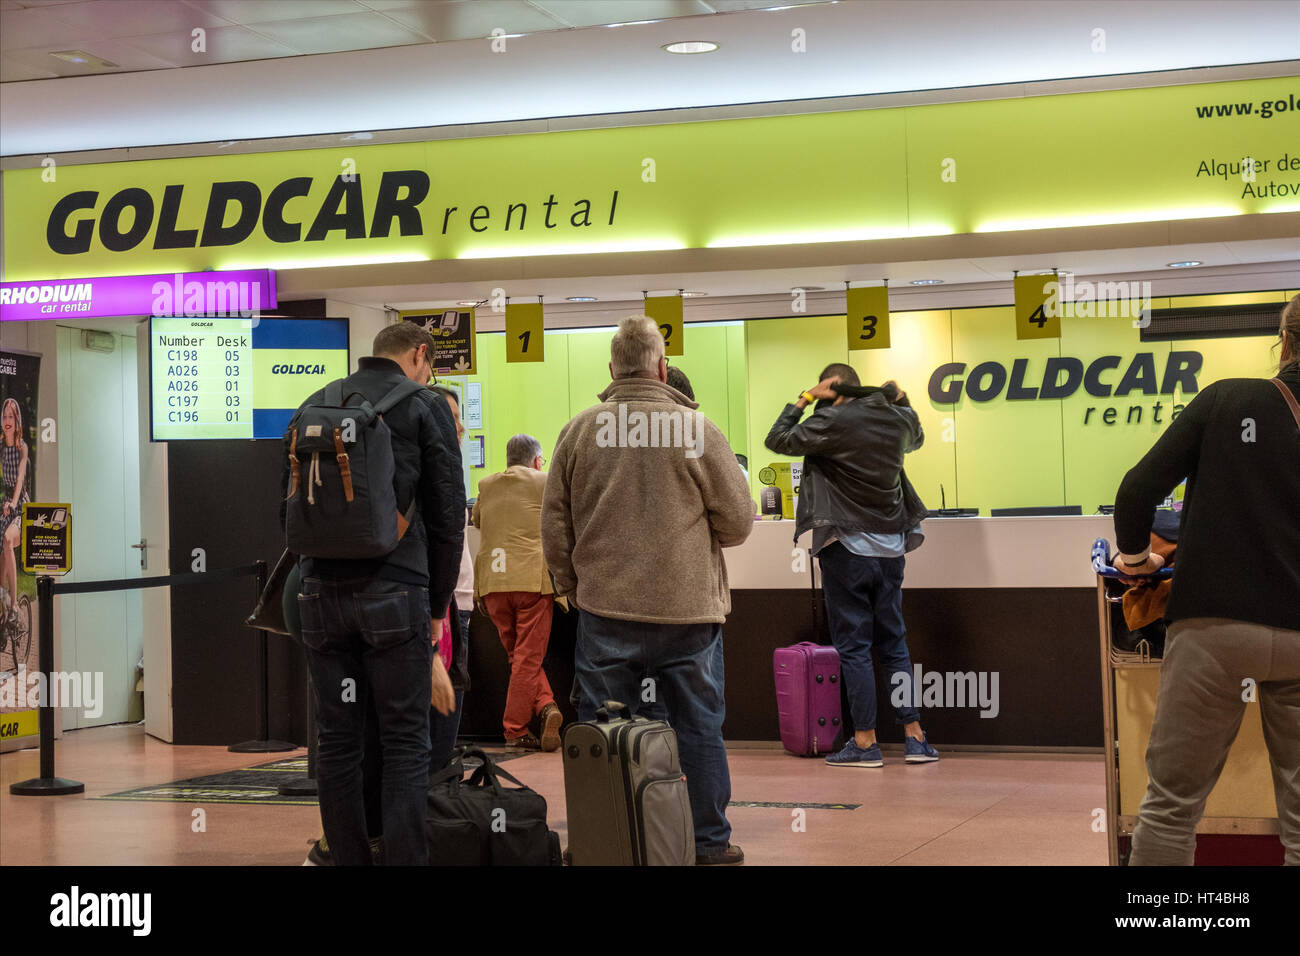 Goldcar Gold Car hire rental car rentals desk at Malaga Airport with customers in line. Stock Photo